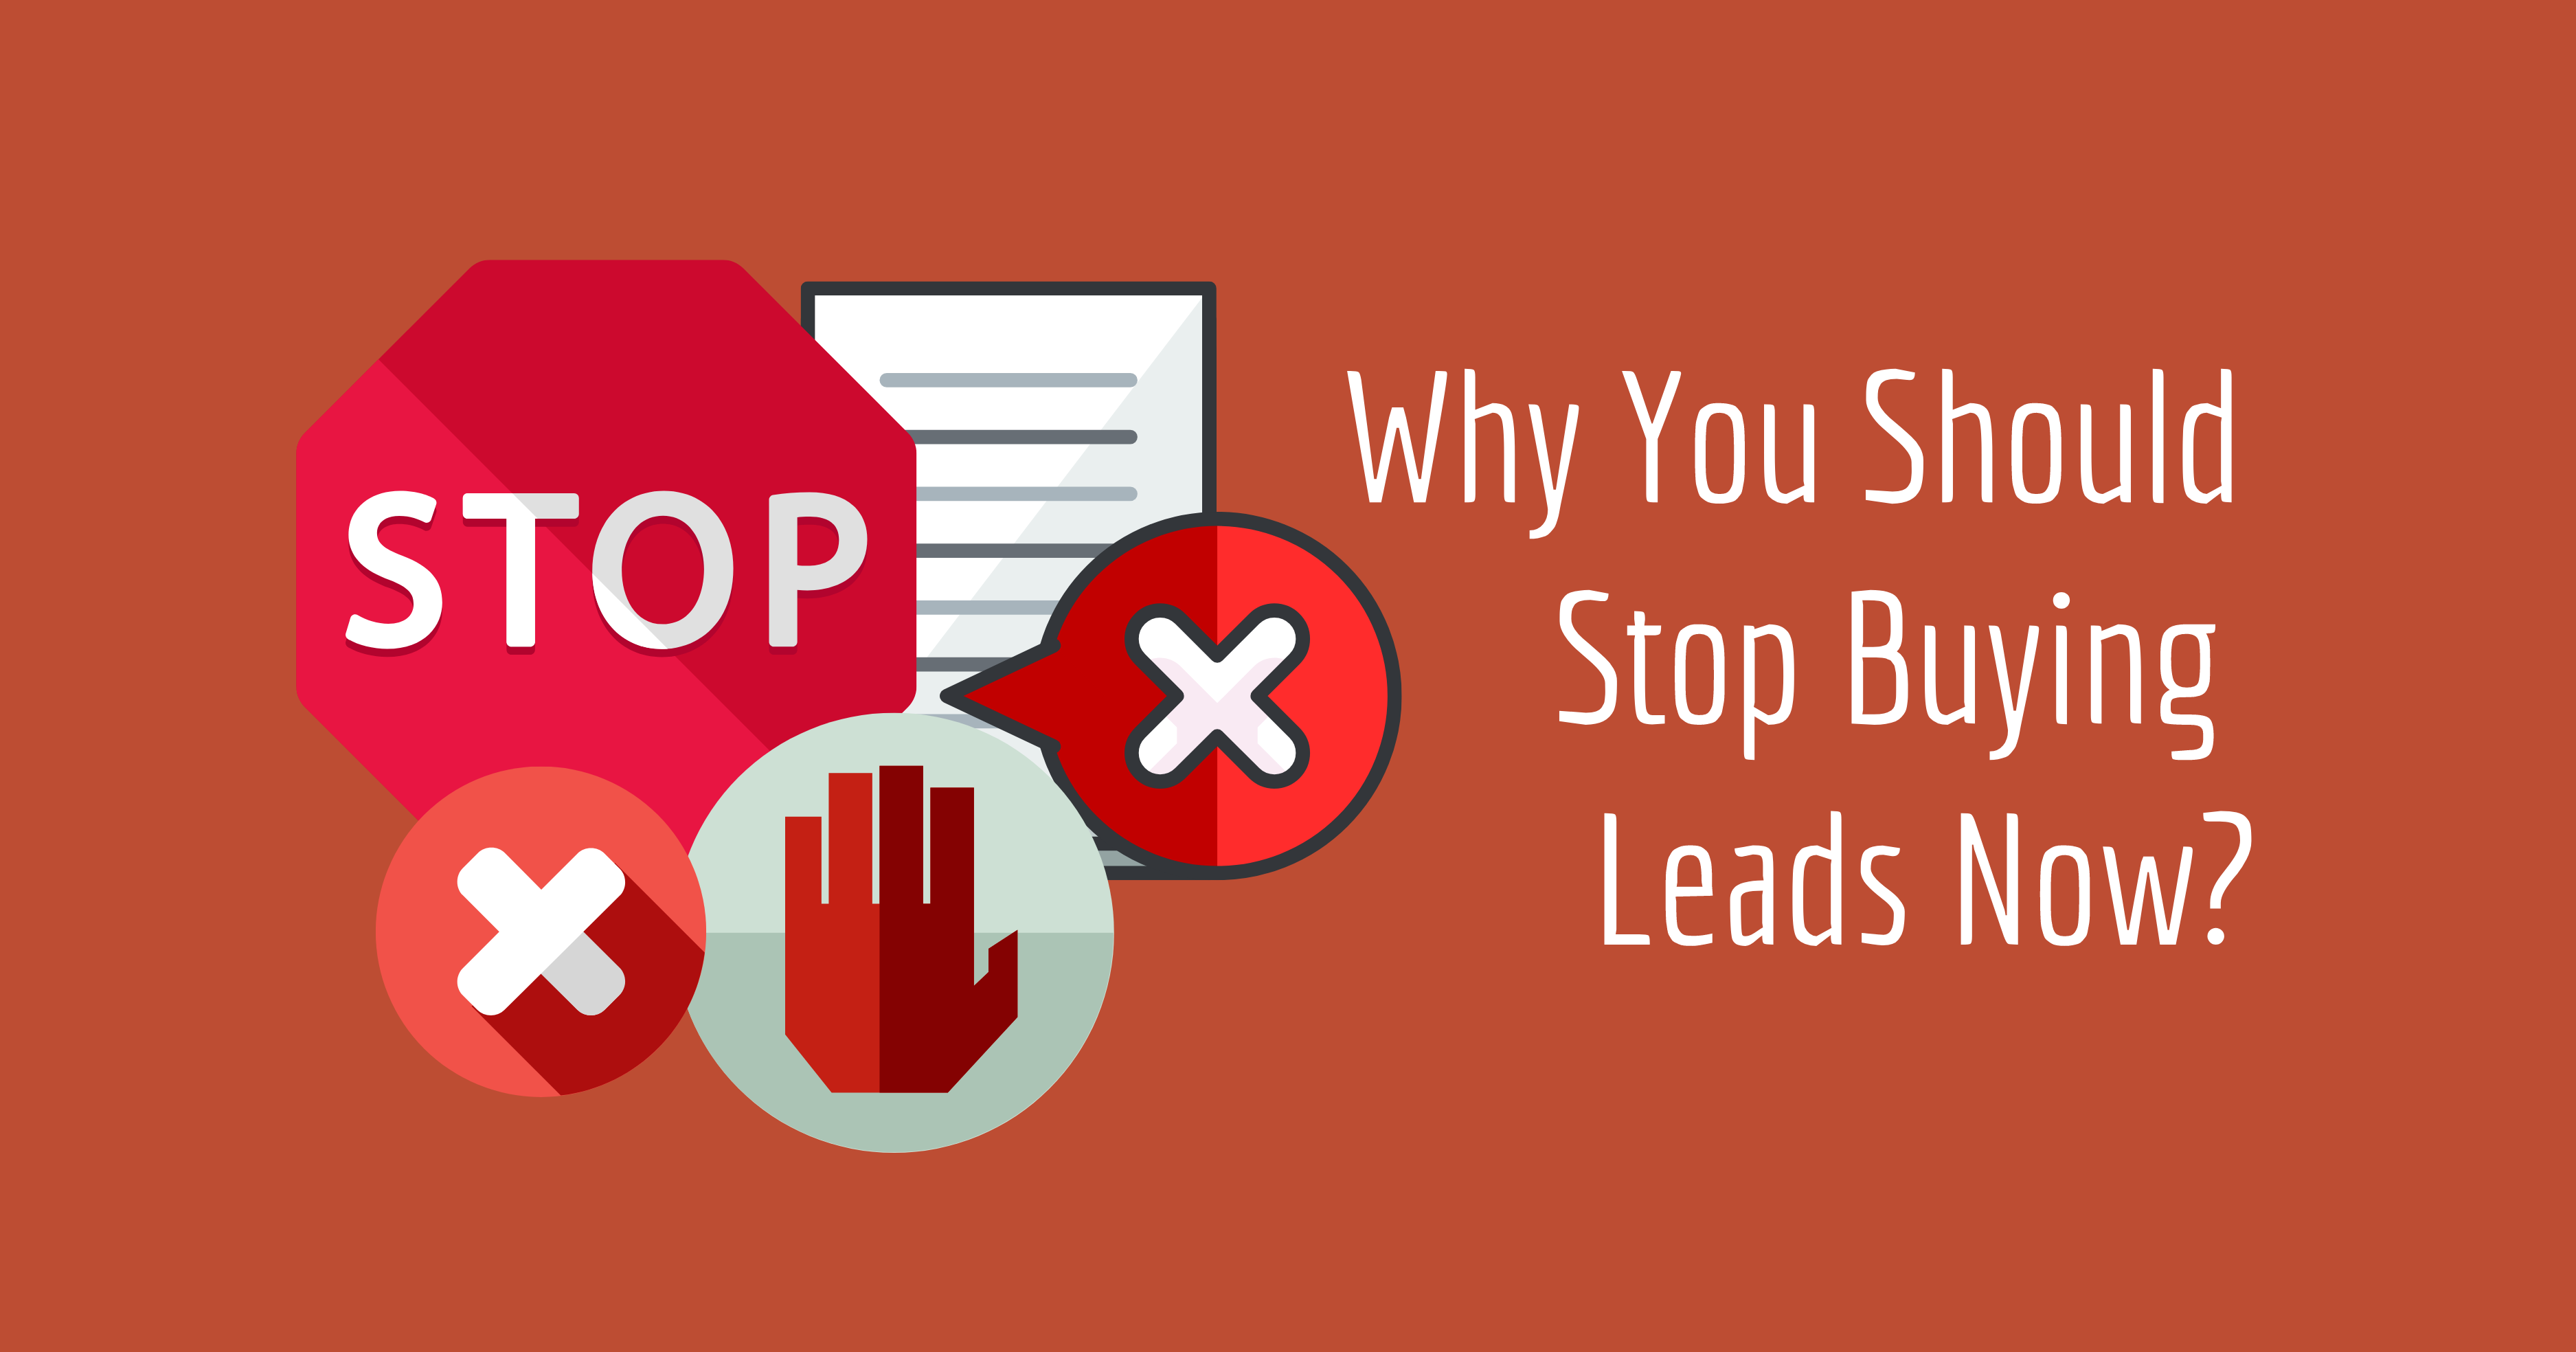 Why You Should Stop Buy Leads Now